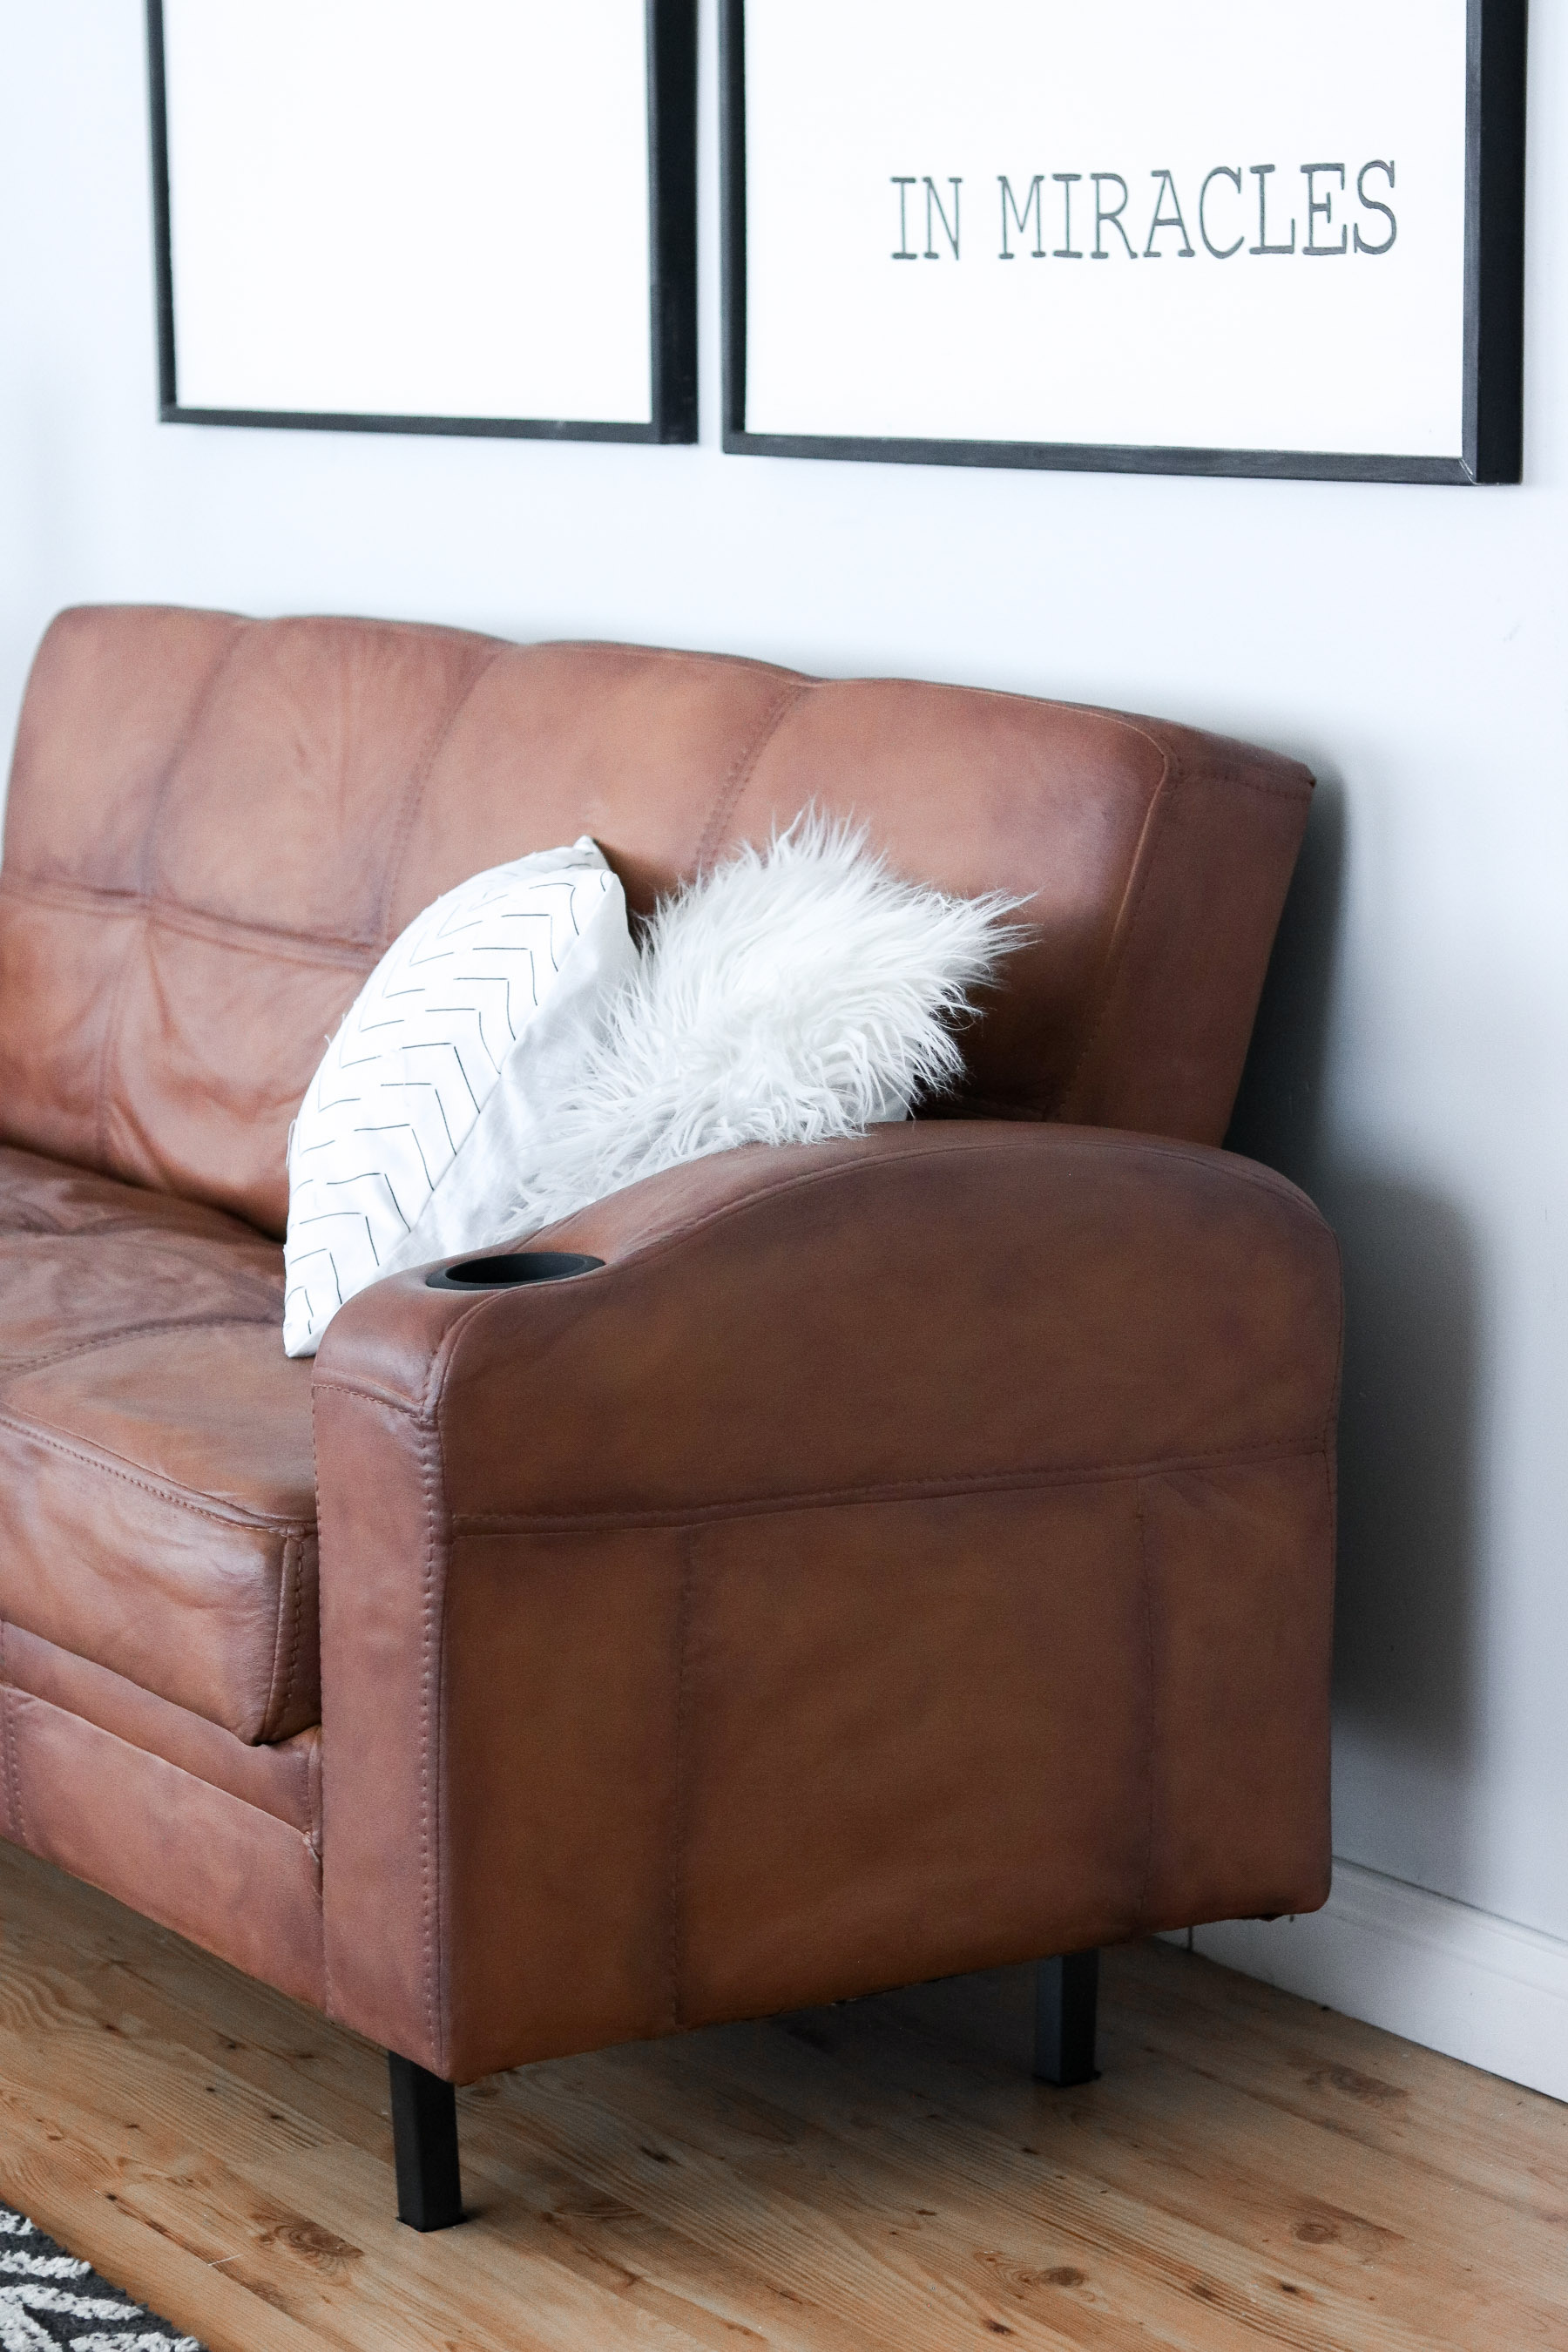 diy leather couch